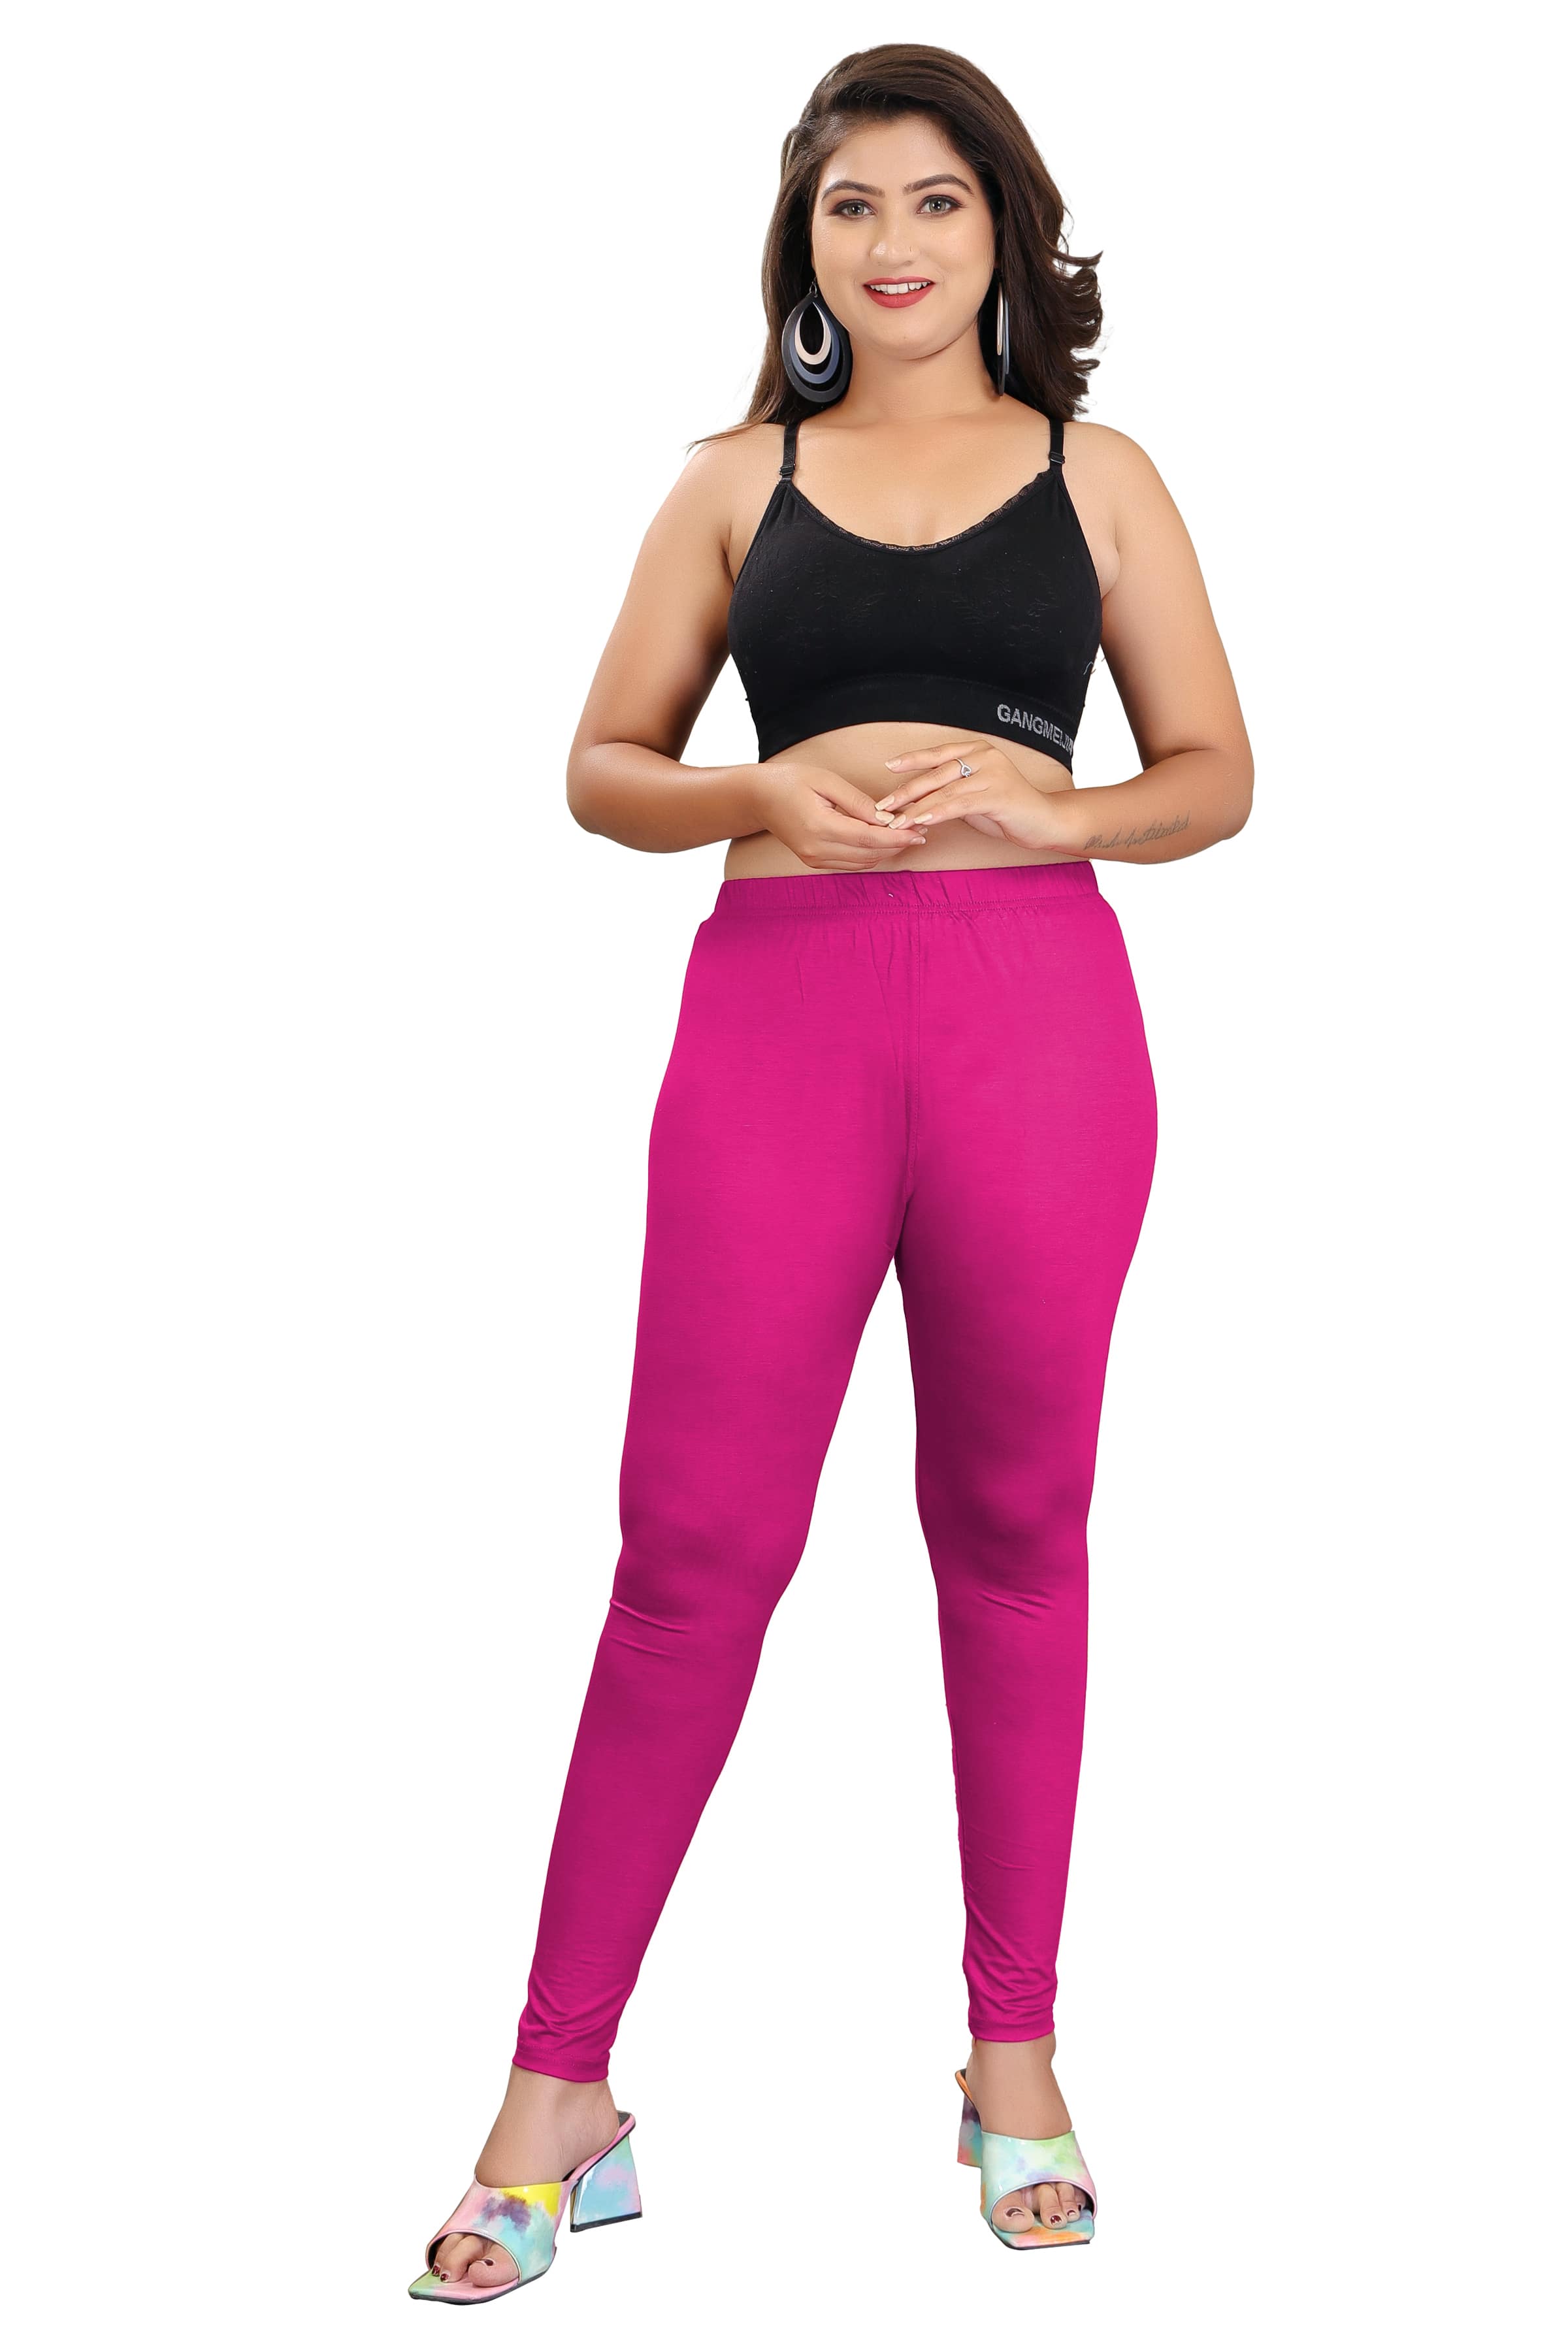 5 Must Have Workout Wear For Women